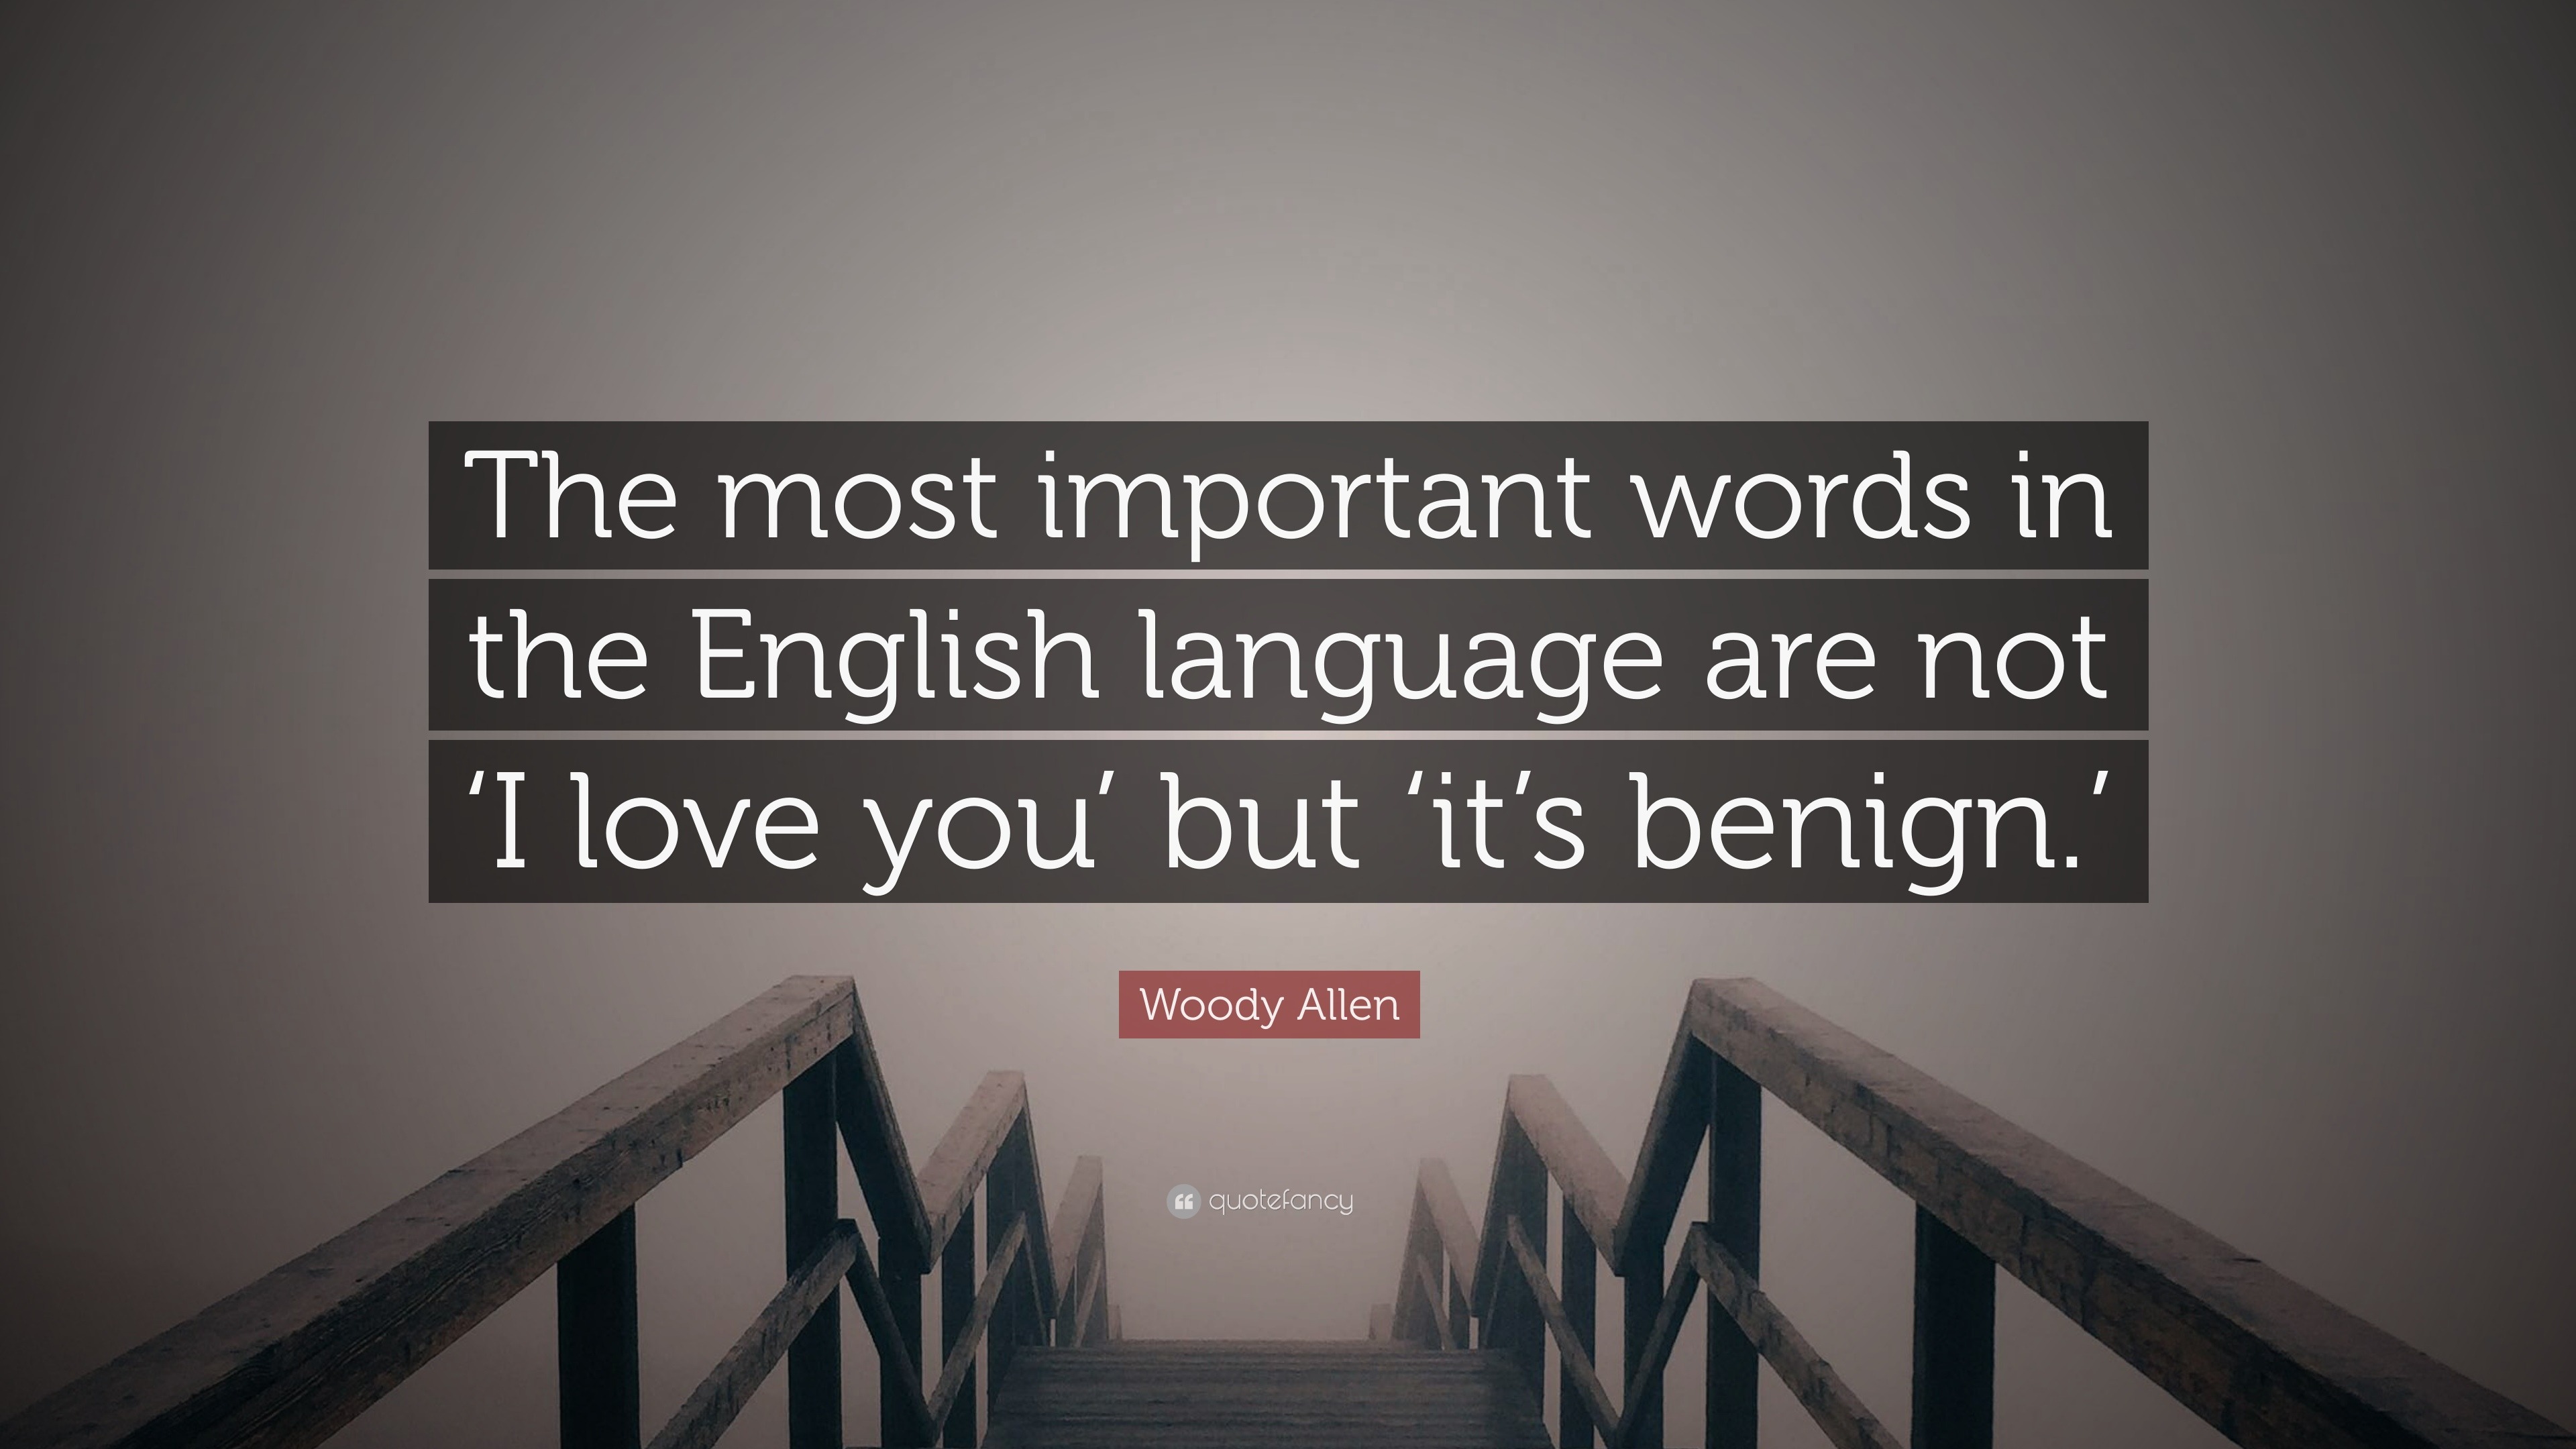 Woody Allen Quote: “The most important words in the English language ...